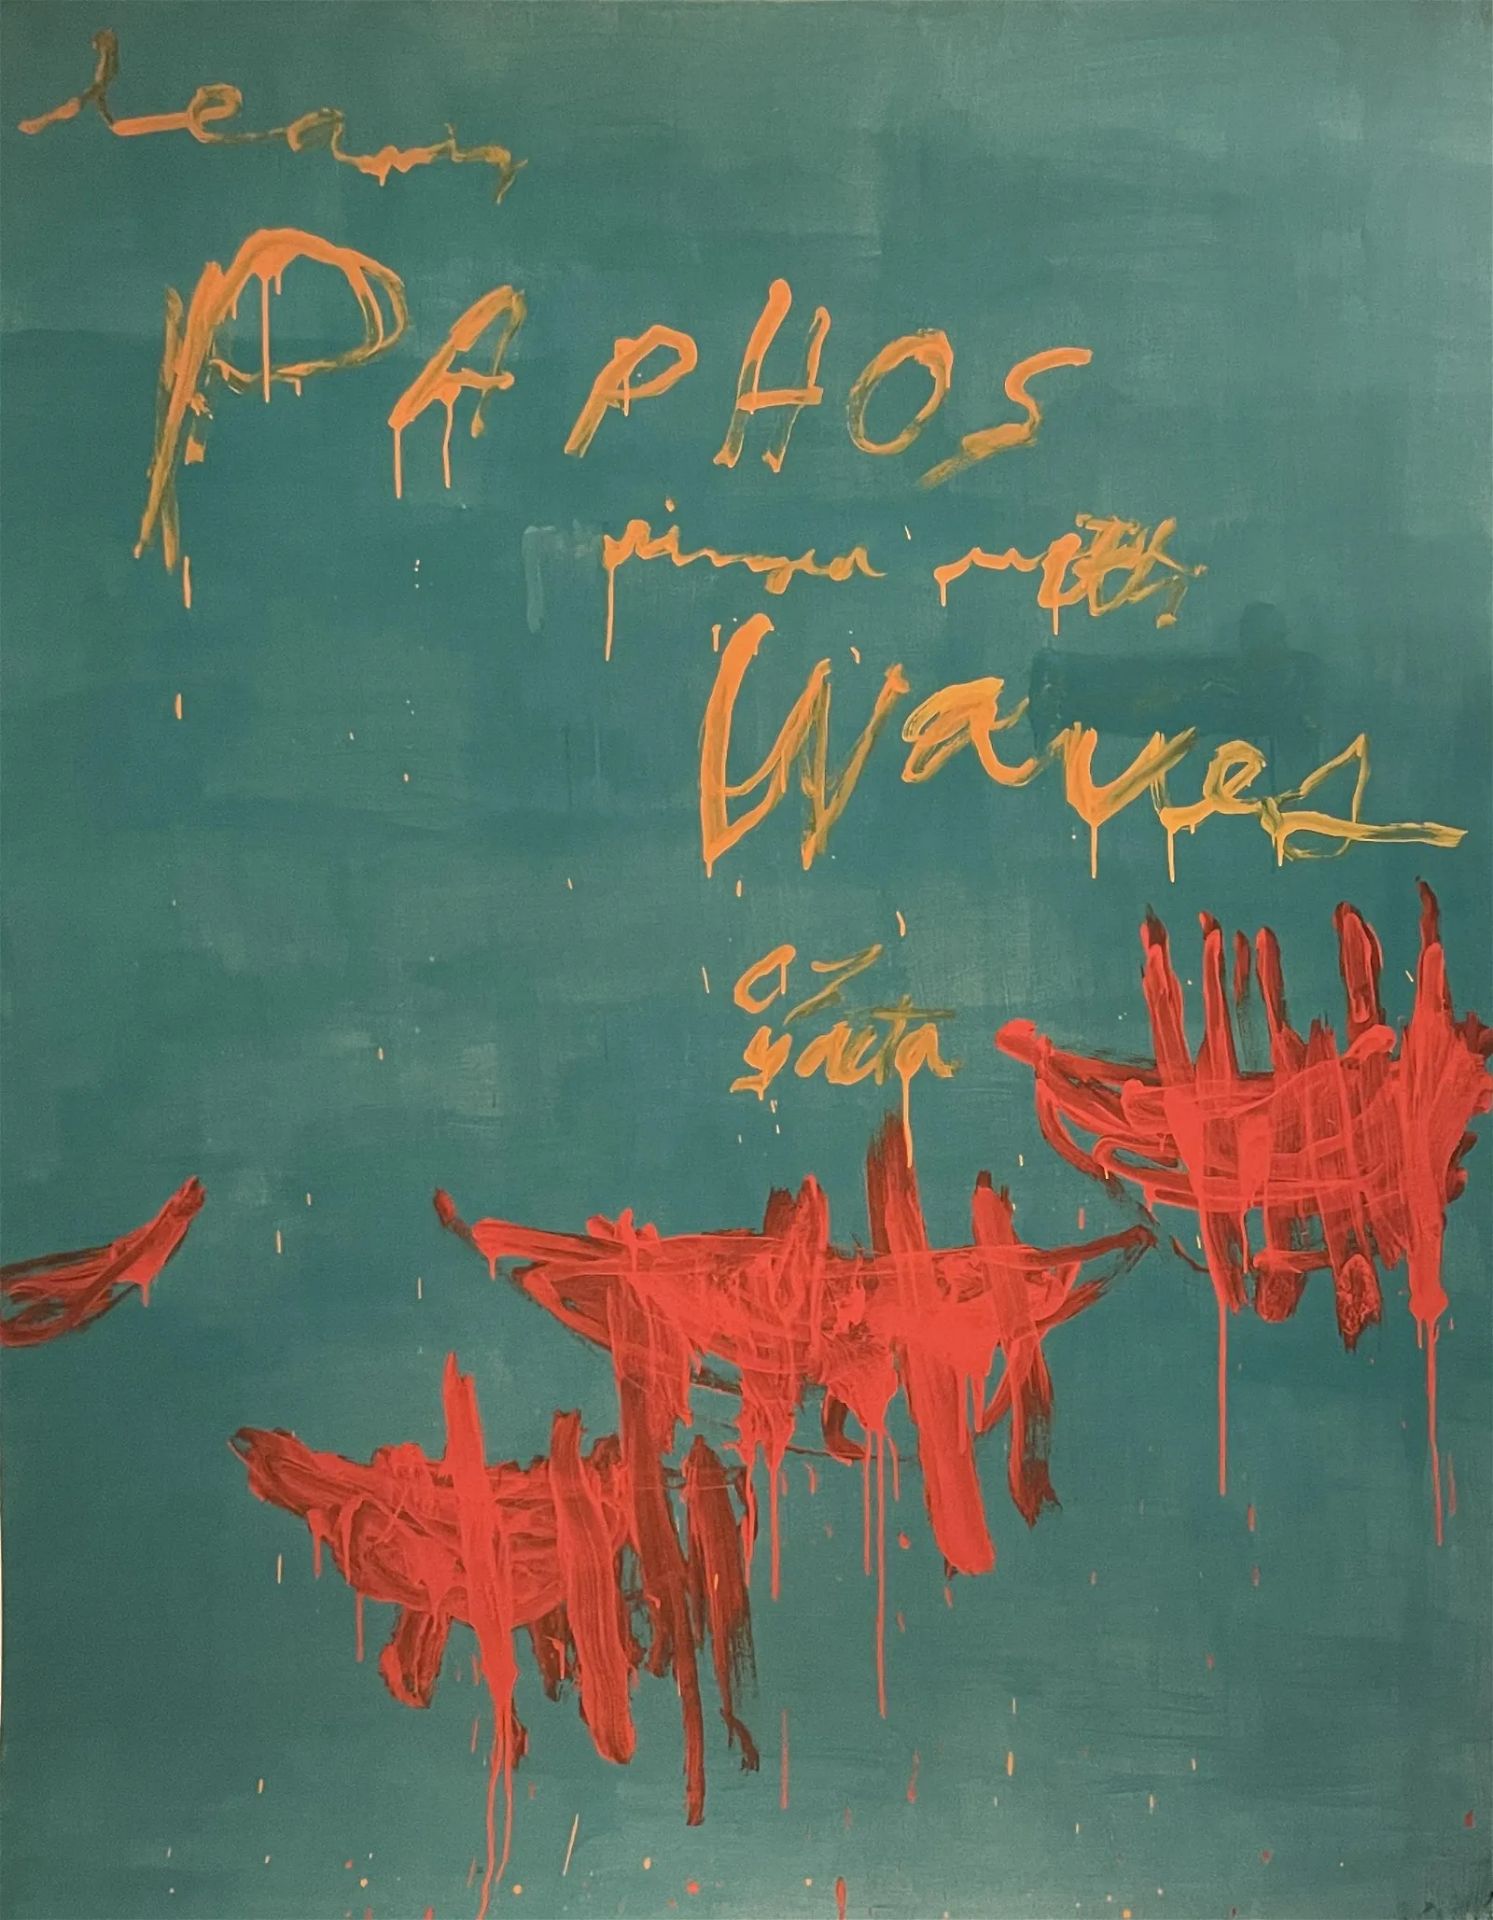 Cy Twombly "Leaving Pathos Ringed with Waves, 2009" Offset Lithograph